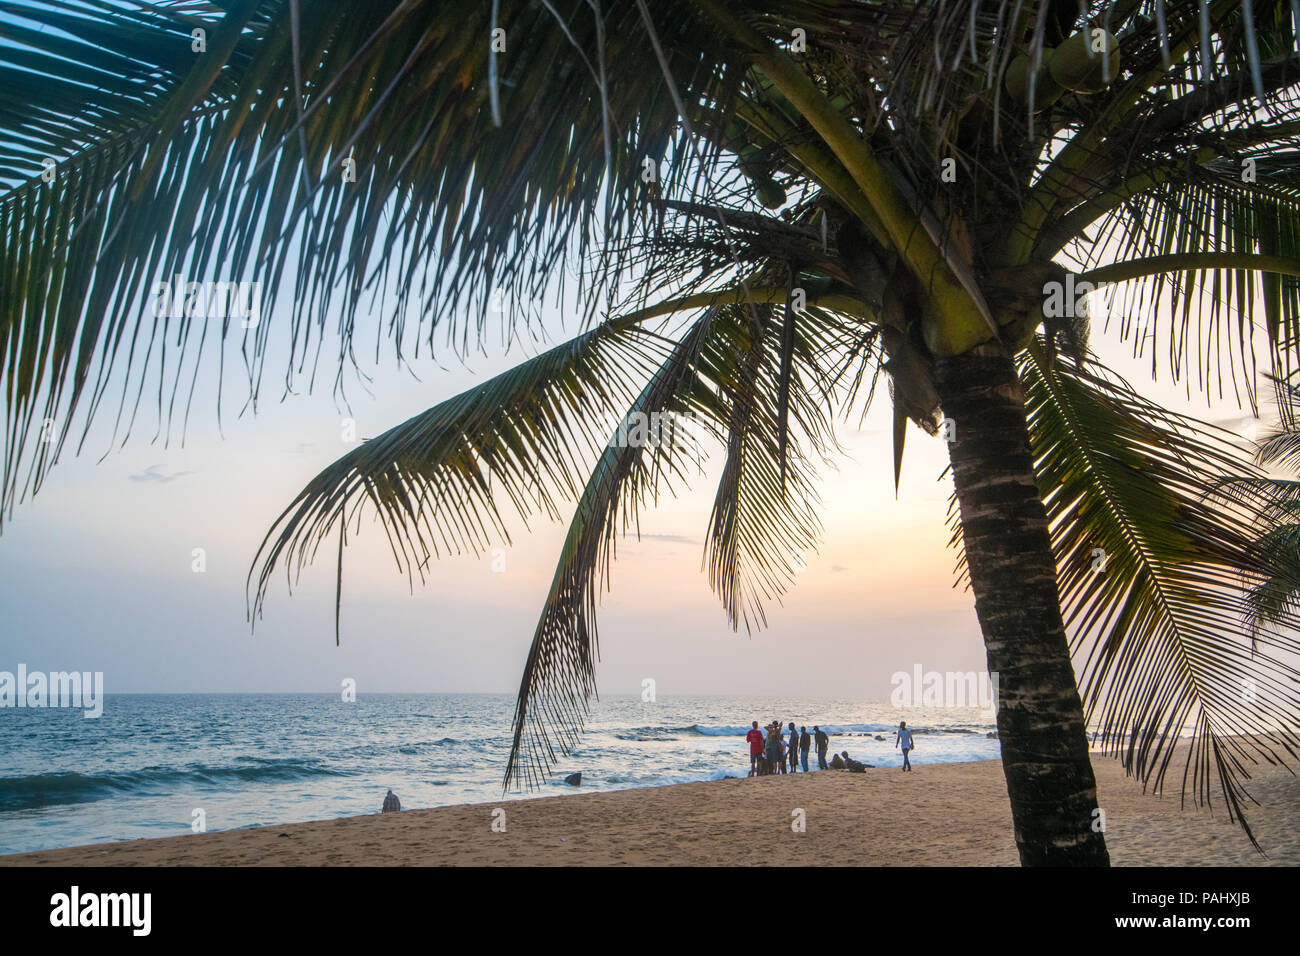 A group of people hangout on the beach looking out into the waves Monrovia, Liberia Stock Photo